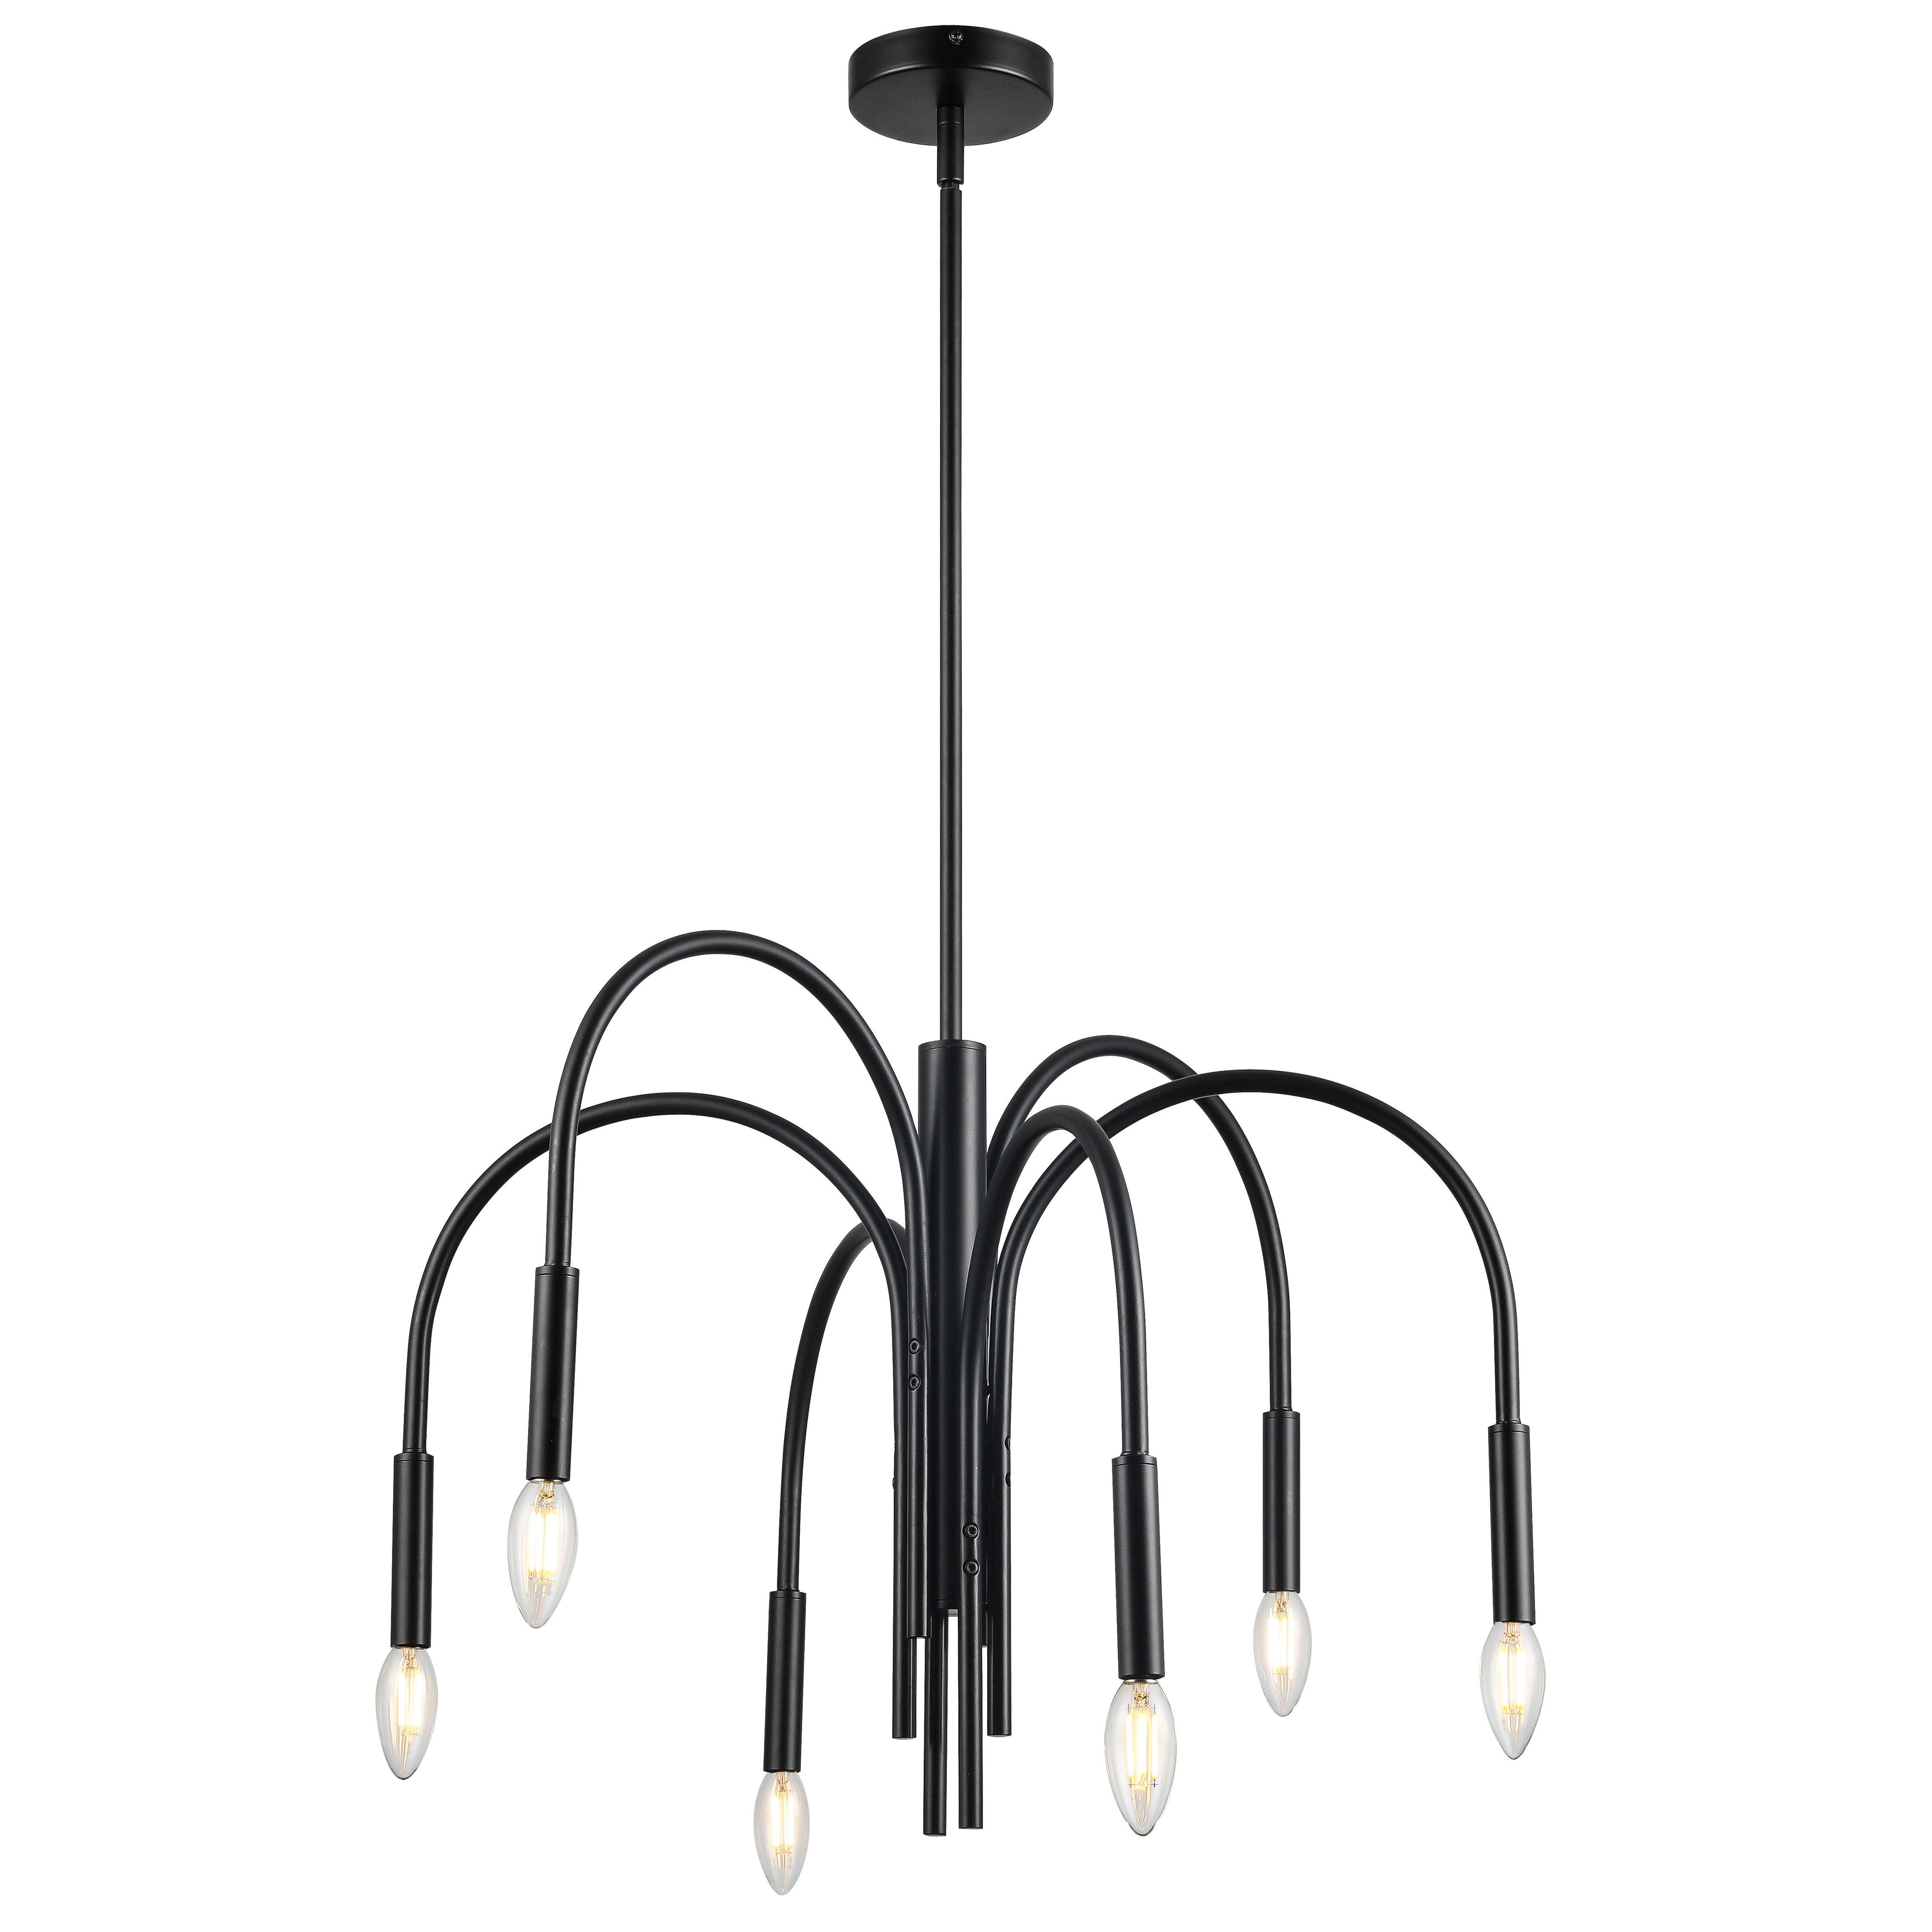 Modern, yet timeless, and sleek, but with a hint of vintage distinction, the Callway chandelier has a fluid sense of elegance that will grace any room.  The base drop is crafted in metal, with a choice of finish that provides a contrast to the light fixtures. The bulbs are round, completing the curved design. Callway chandelier lighting will blend with both modern and more traditional furnishings, including mid-century and pop art design schemes.